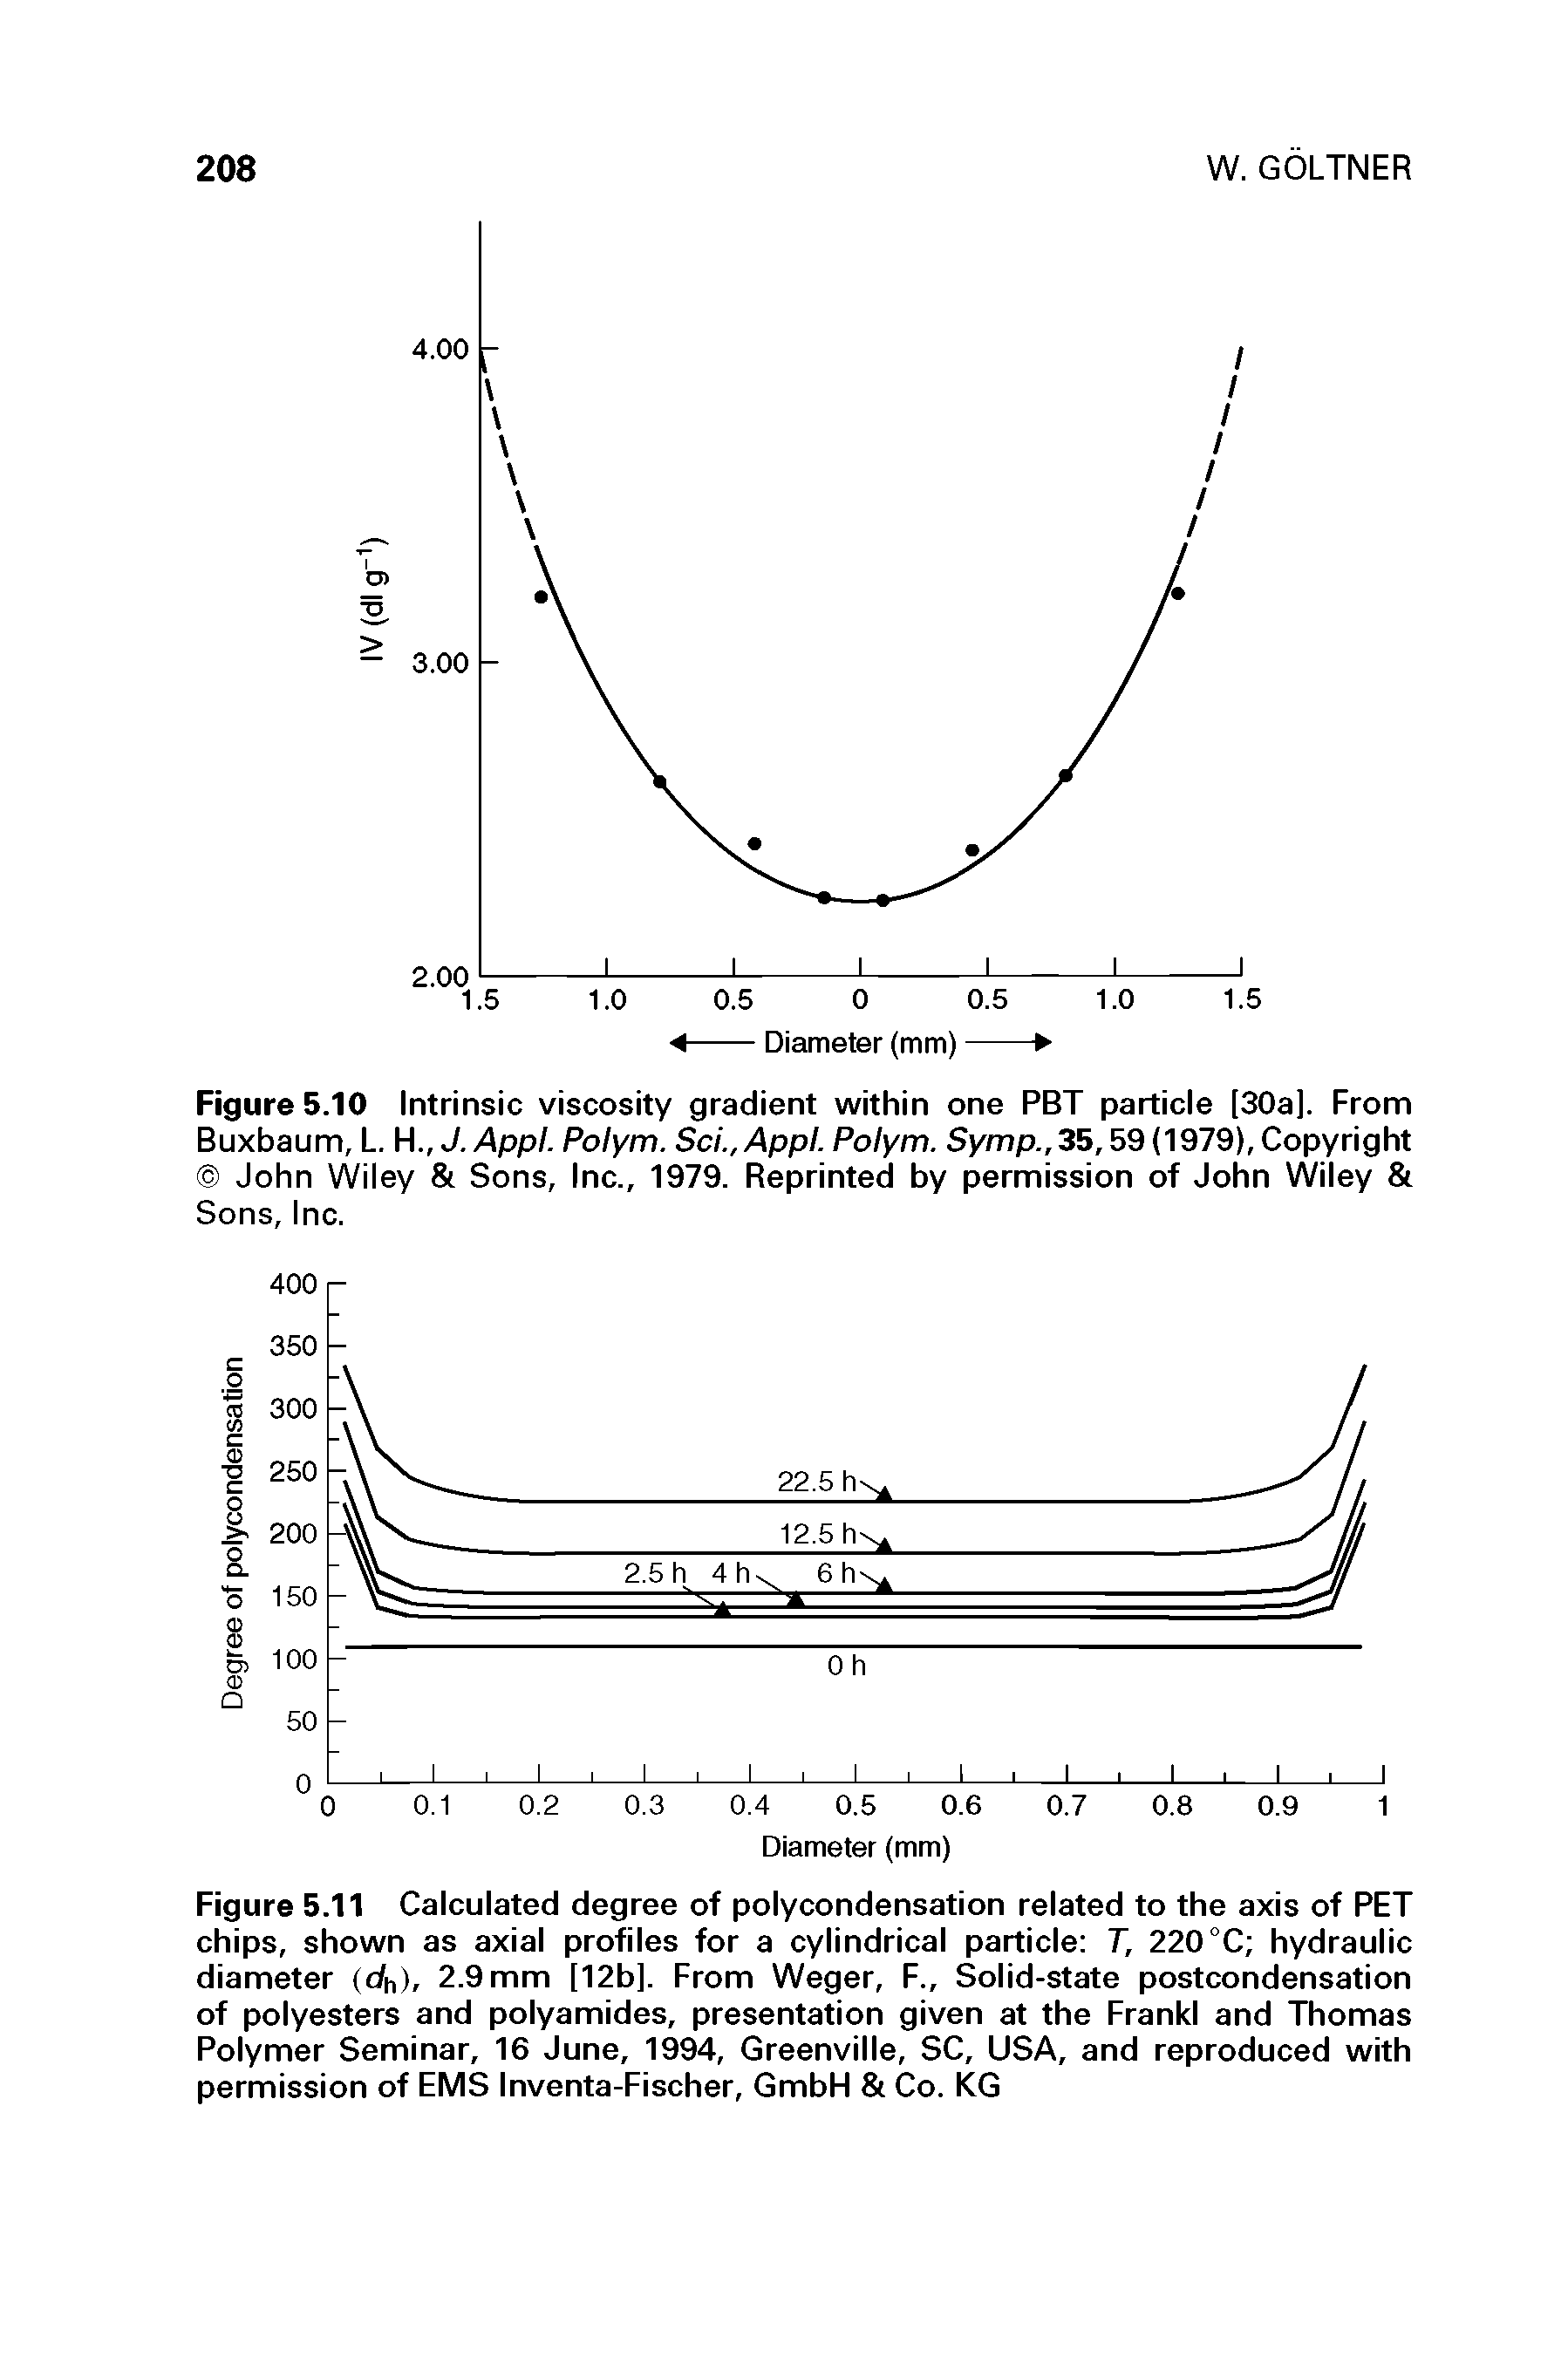 Figure 5.11 Calculated degree of polycondensation related to the axis of PET chips, shown as axial profiles for a cylindrical particle T, 220 °C hydraulic diameter (dh). 2.9 mm [12b]. From Weger, F., Solid-state postcondensation of polyesters and polyamides, presentation given at the Frankl and Thomas Polymer Seminar, 16 June, 1994, Greenville, SC, USA, and reproduced with permission of EMS Inventa-Fischer, GmbH Co. KG...